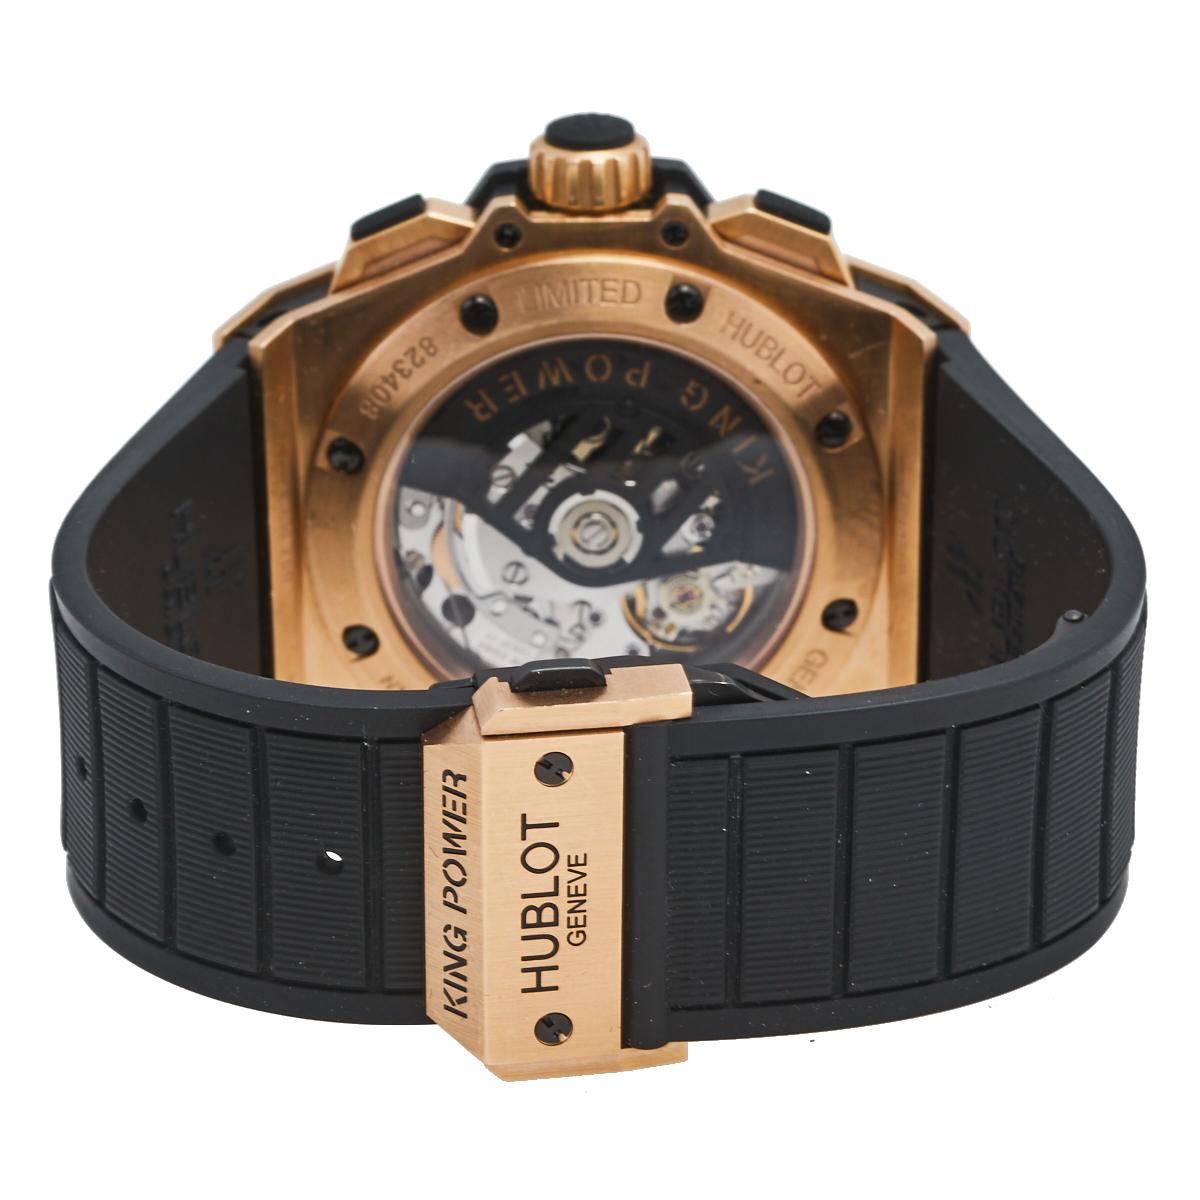 The King Power series of watches is a fascinating extension of Hublot's Big Bang collection. This model is from a limited edition. Using 18k rose gold, Hublot sculpted out the case and fitted it with a black dial that has the brand logo, two